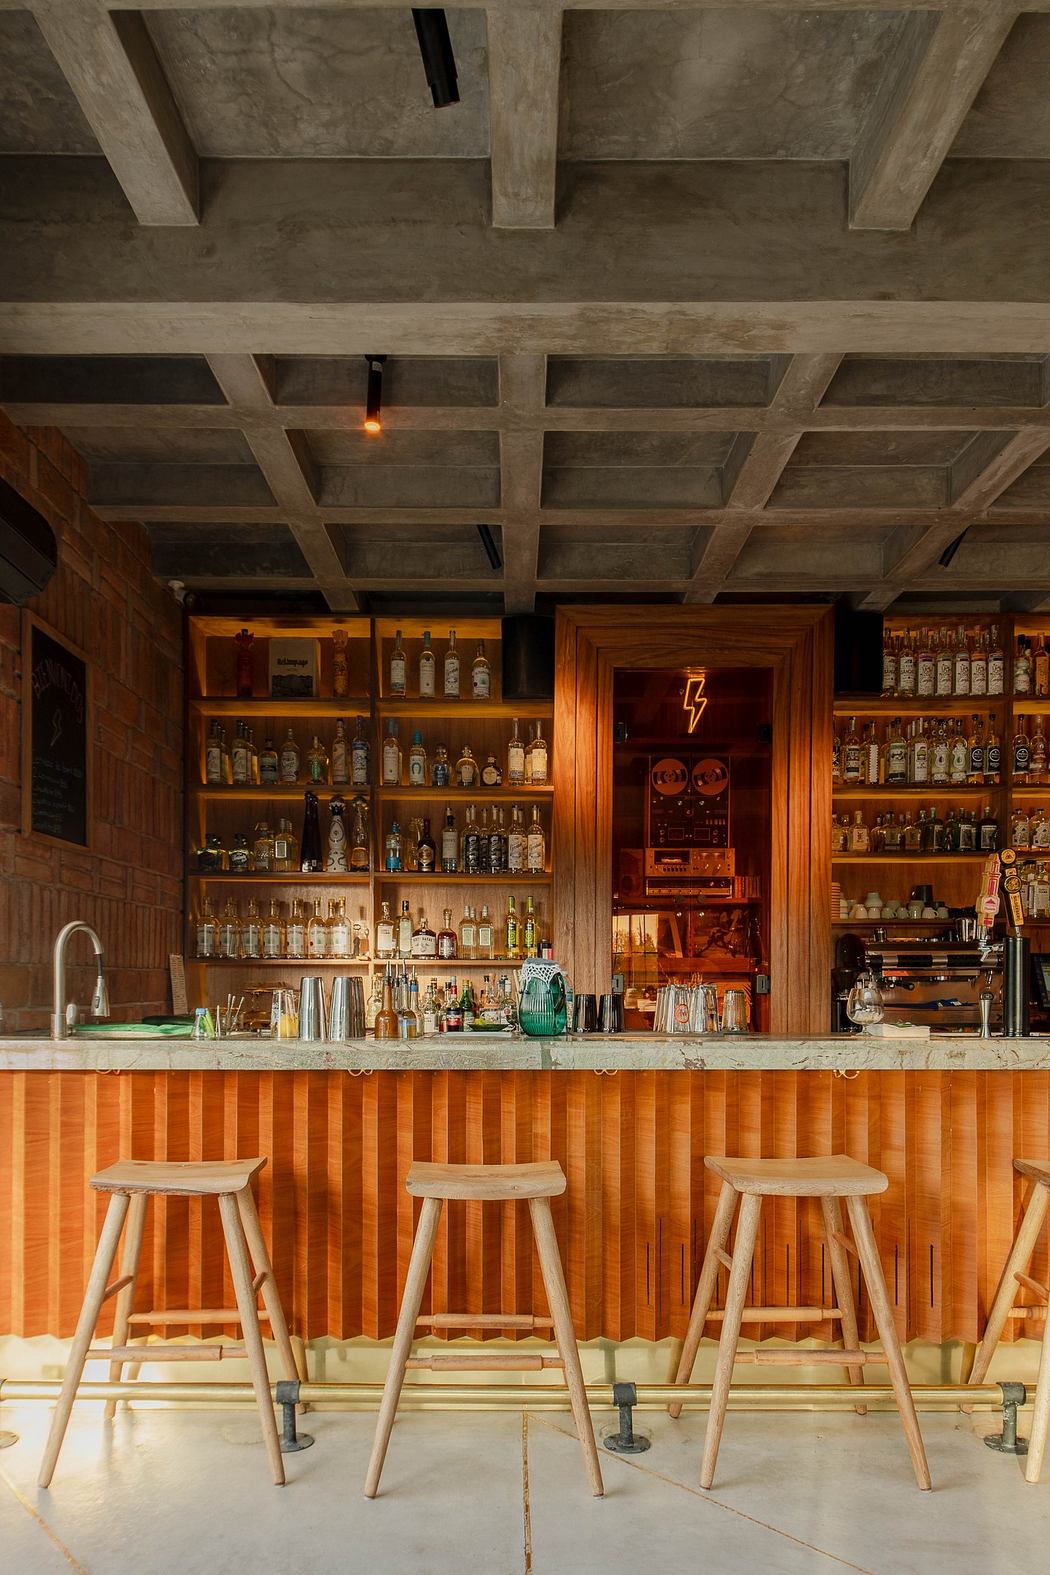 Modern bar interior with wooden accents and exposed concrete ceiling.